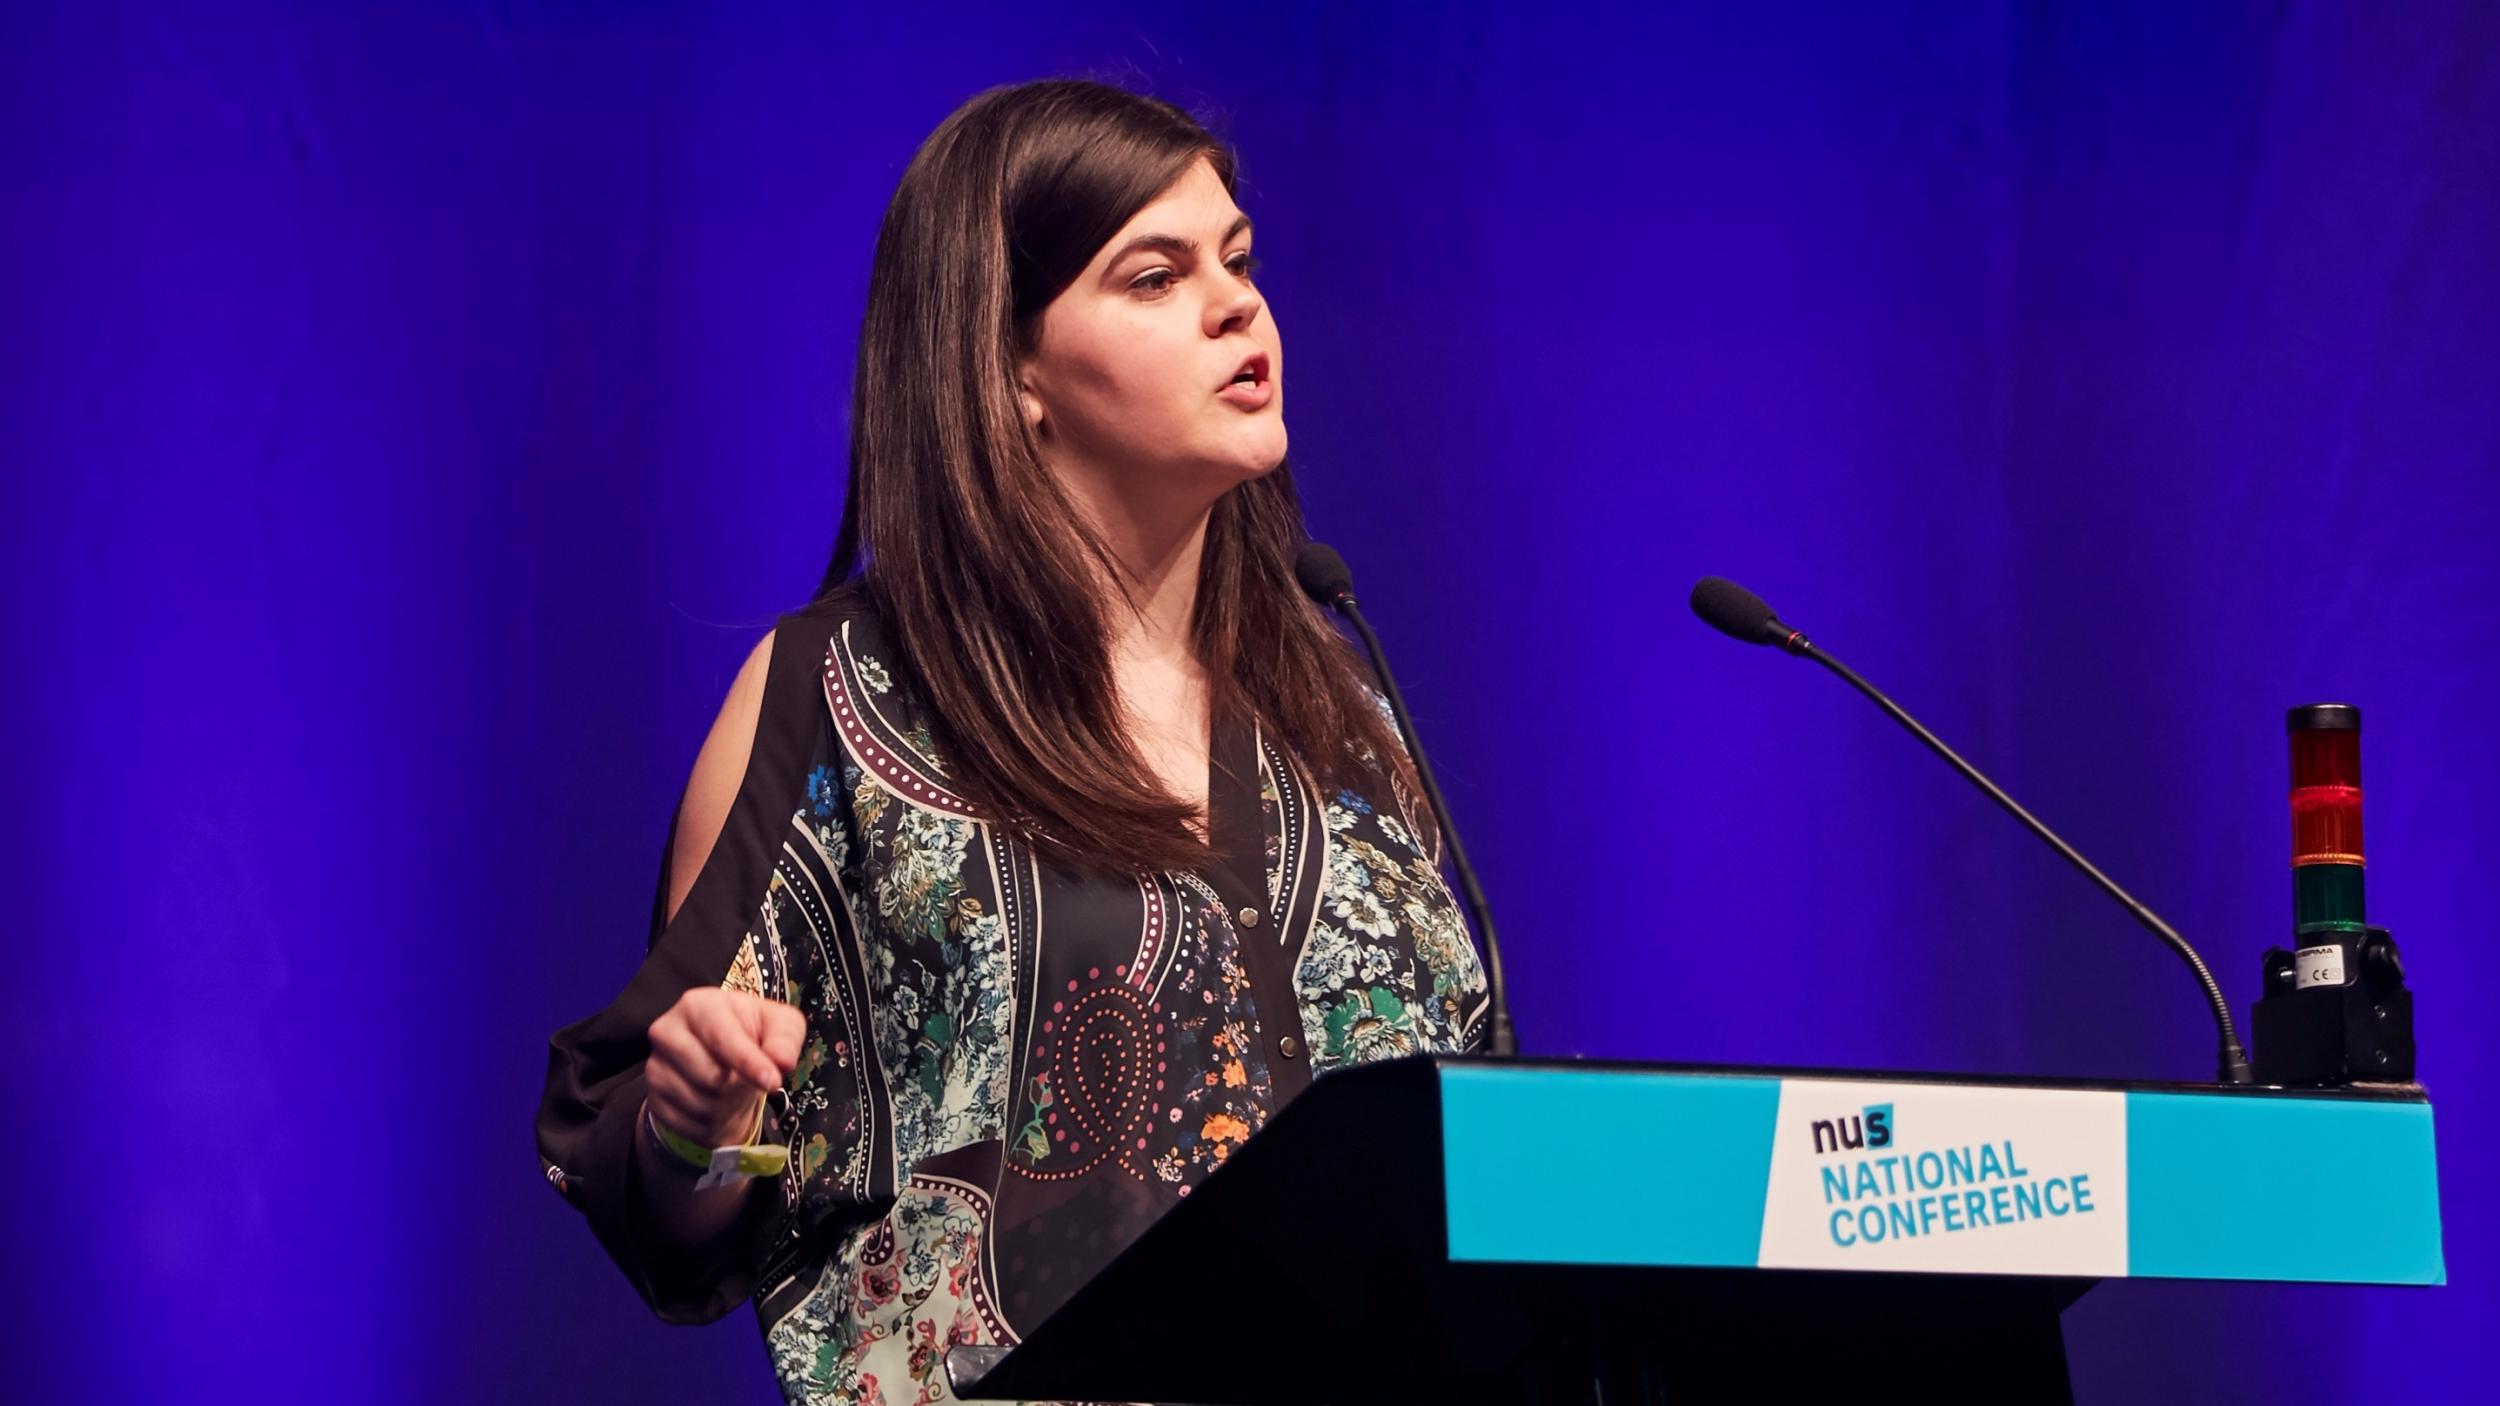 NUS national president Megan Dunn, pictured, makes the opening remarks as the conference gets underway